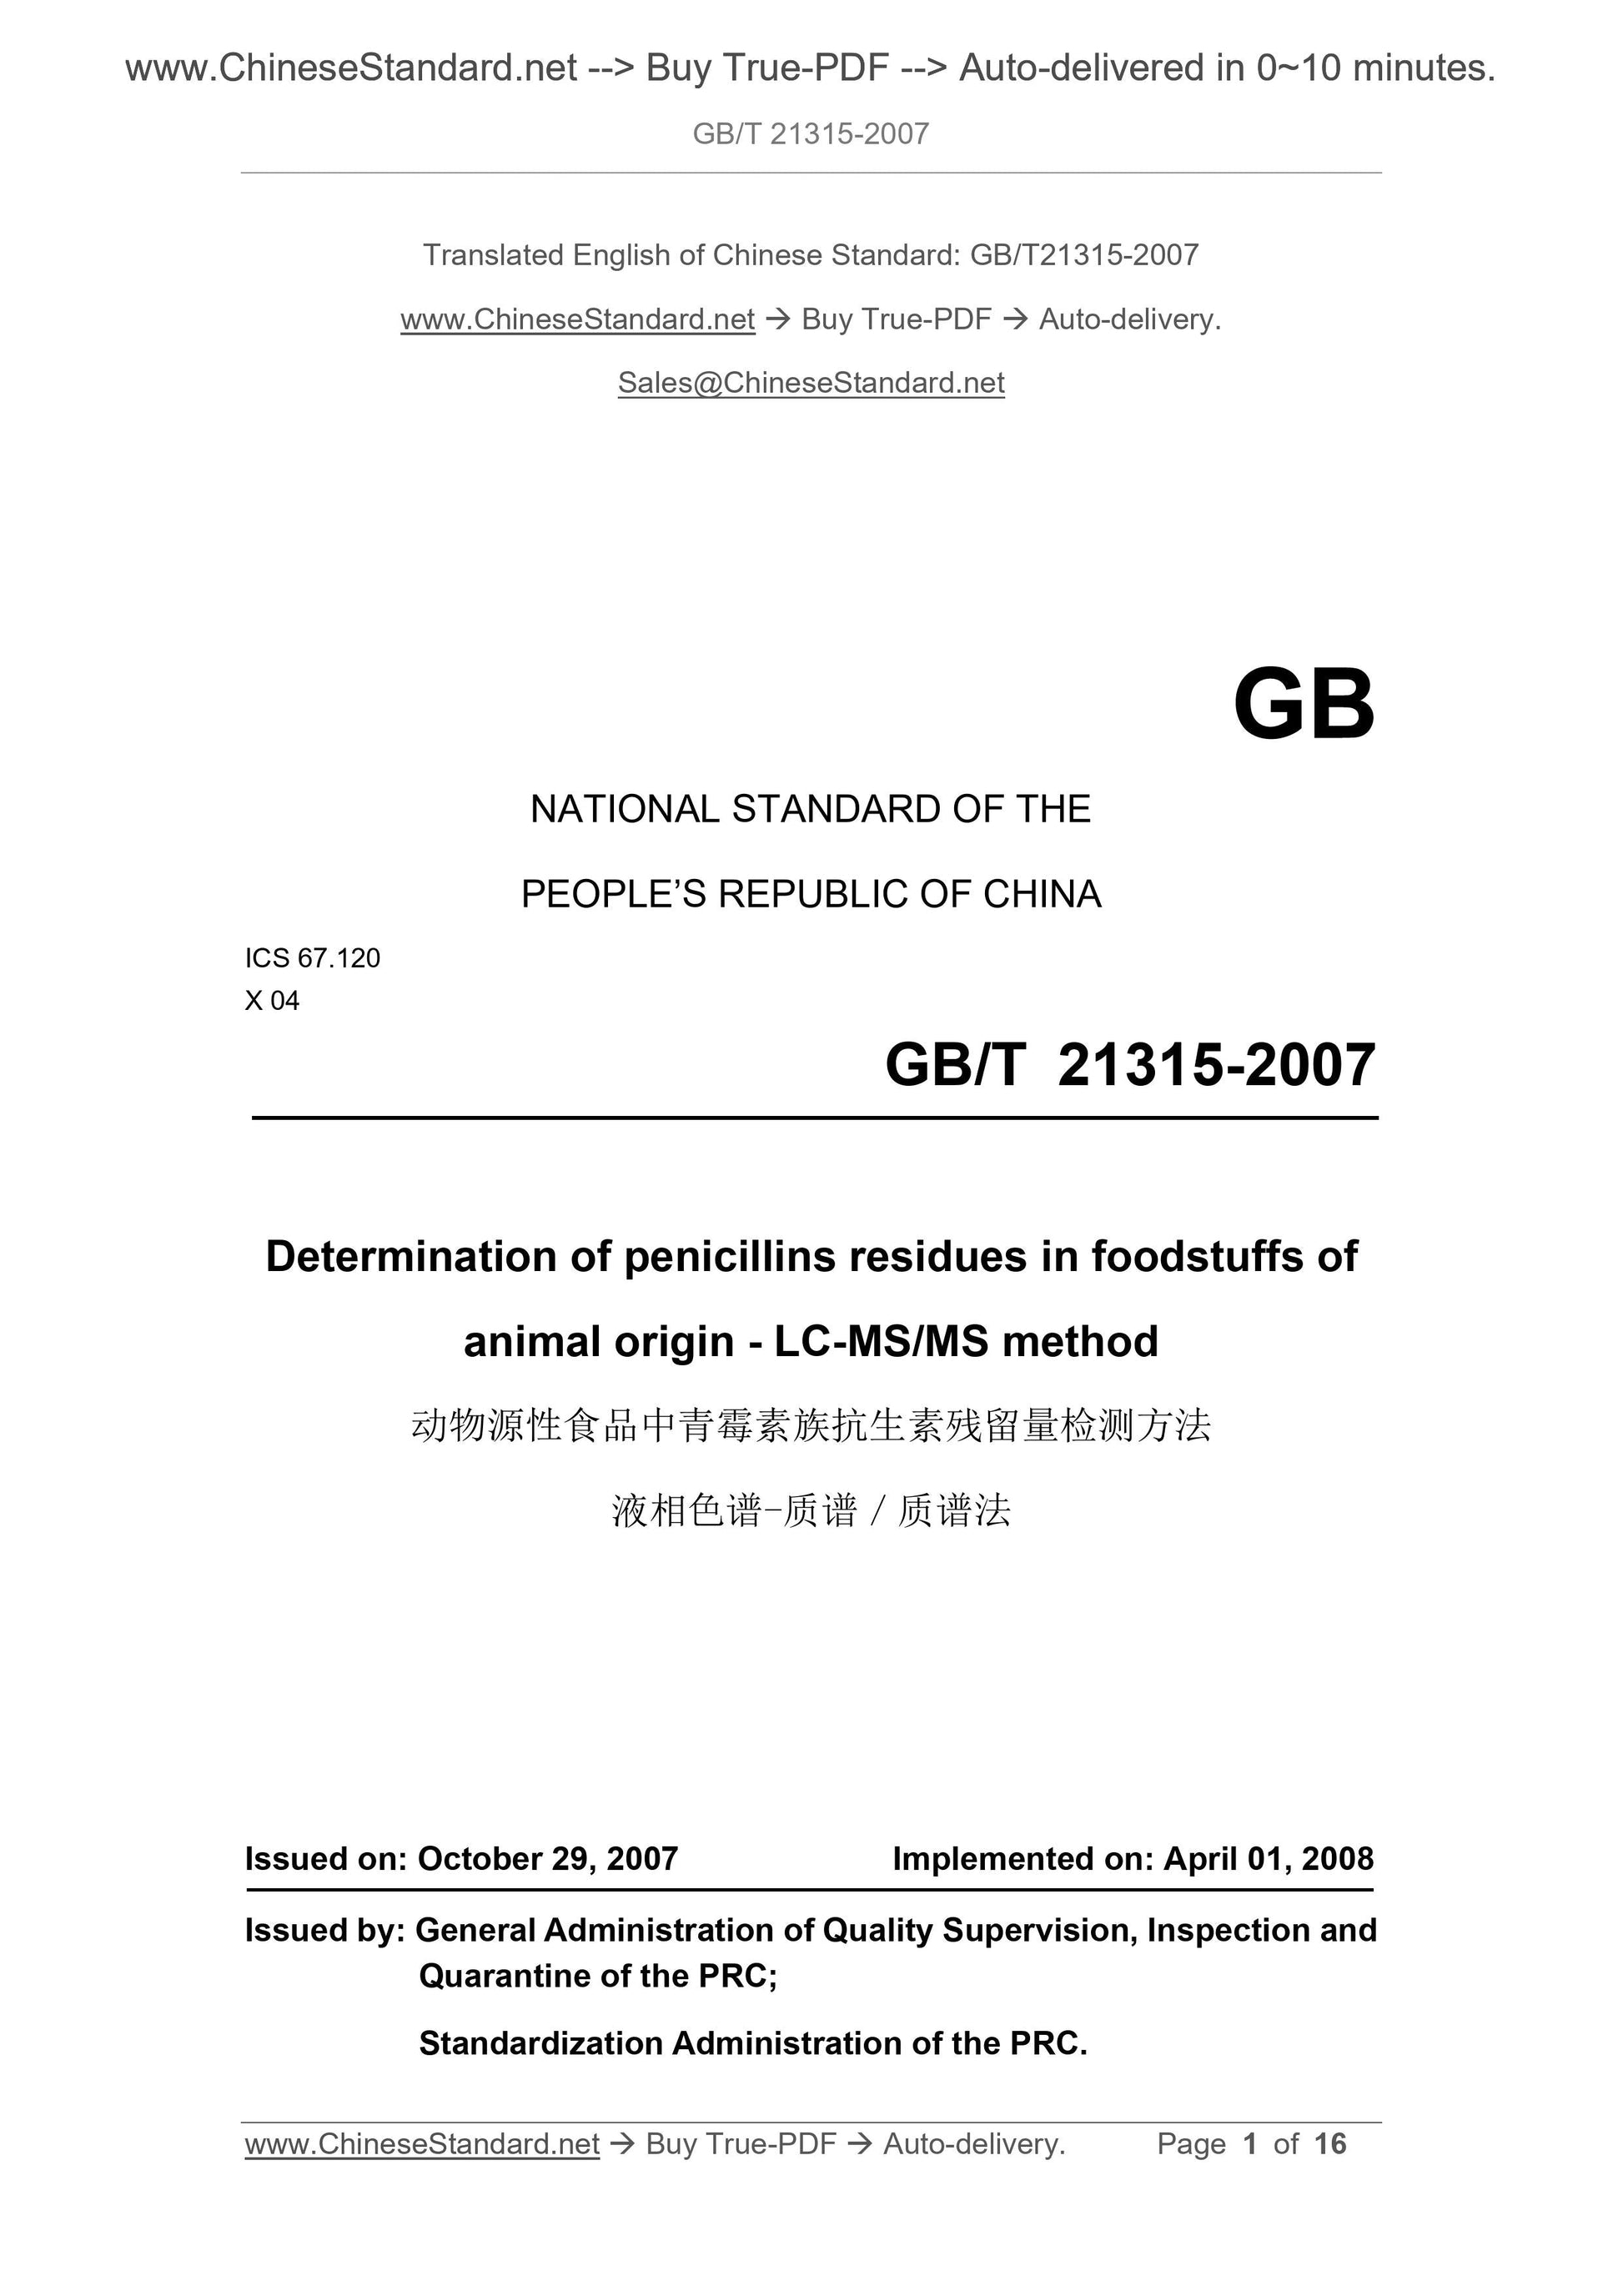 GB/T 21315-2007 Page 1